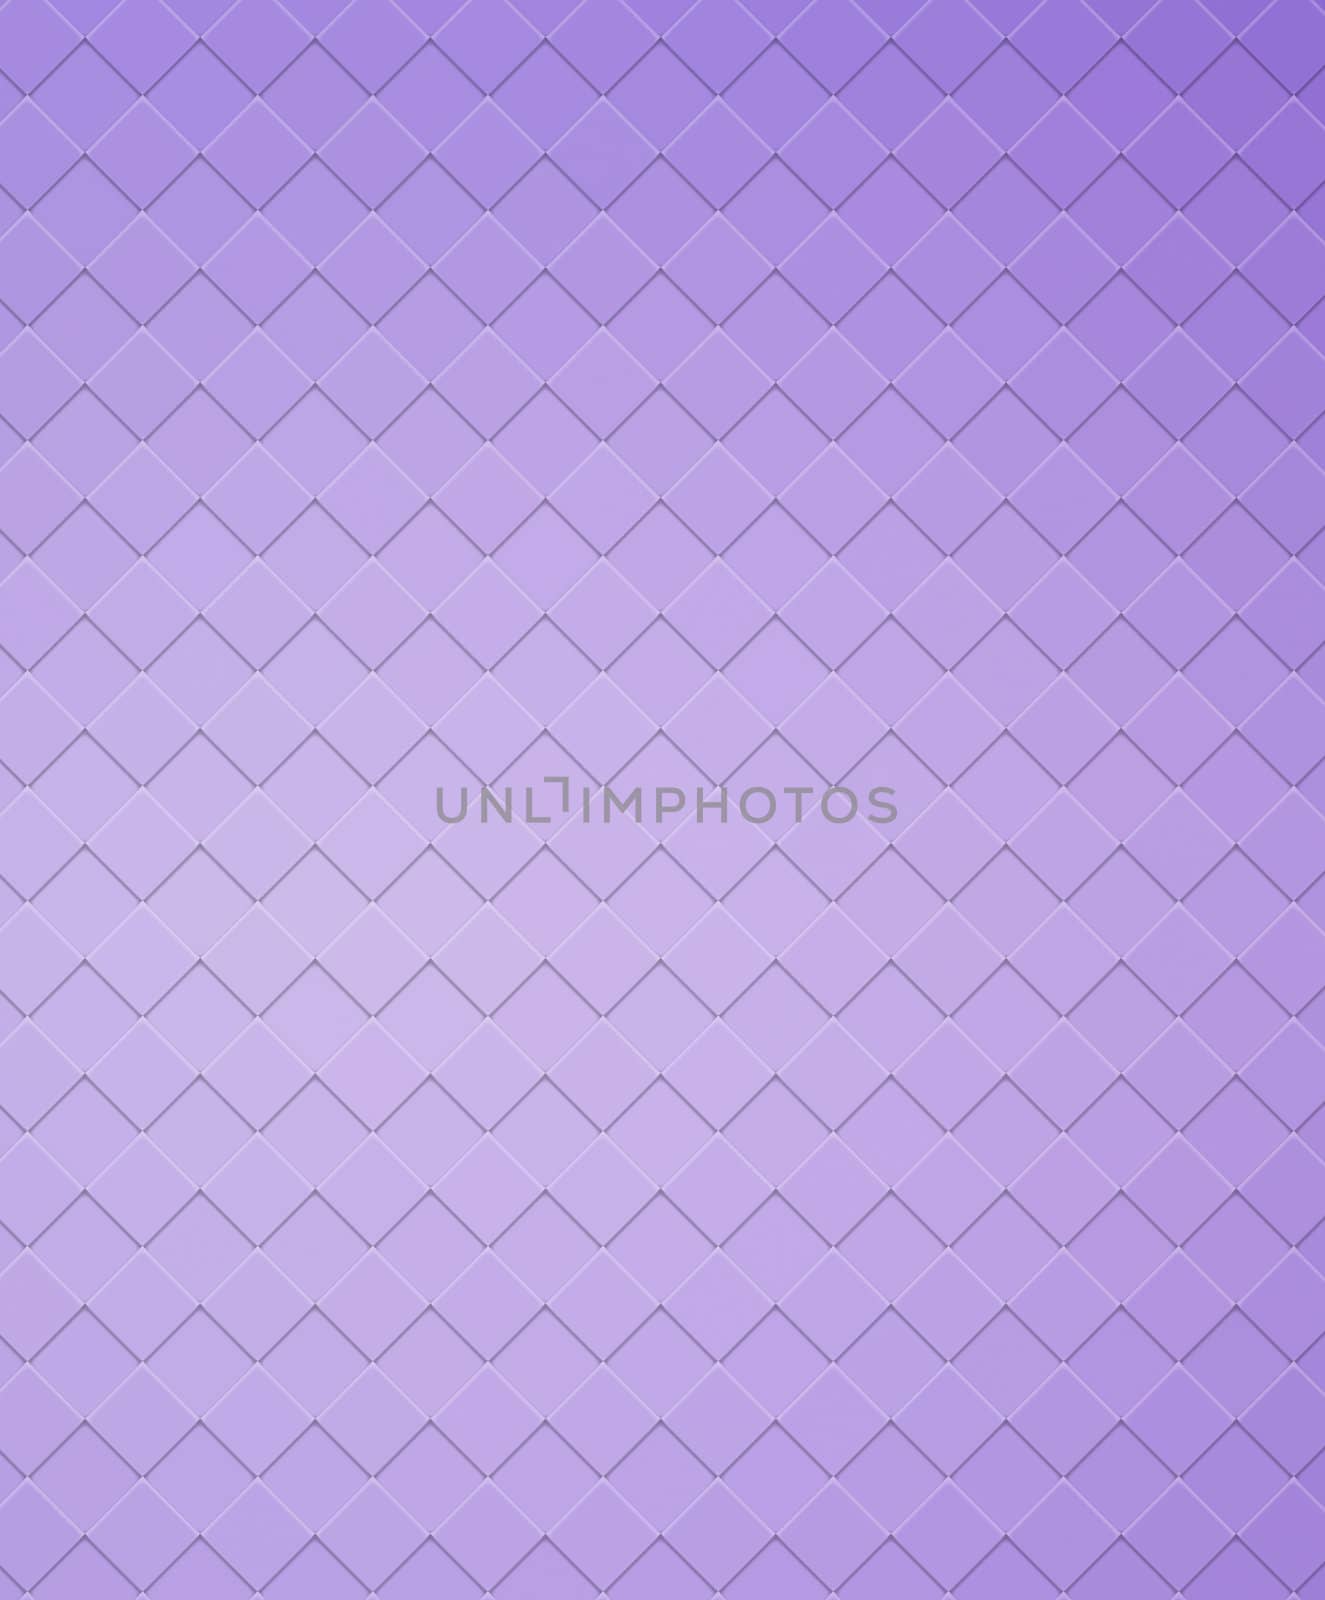 An image of a nice abstract background